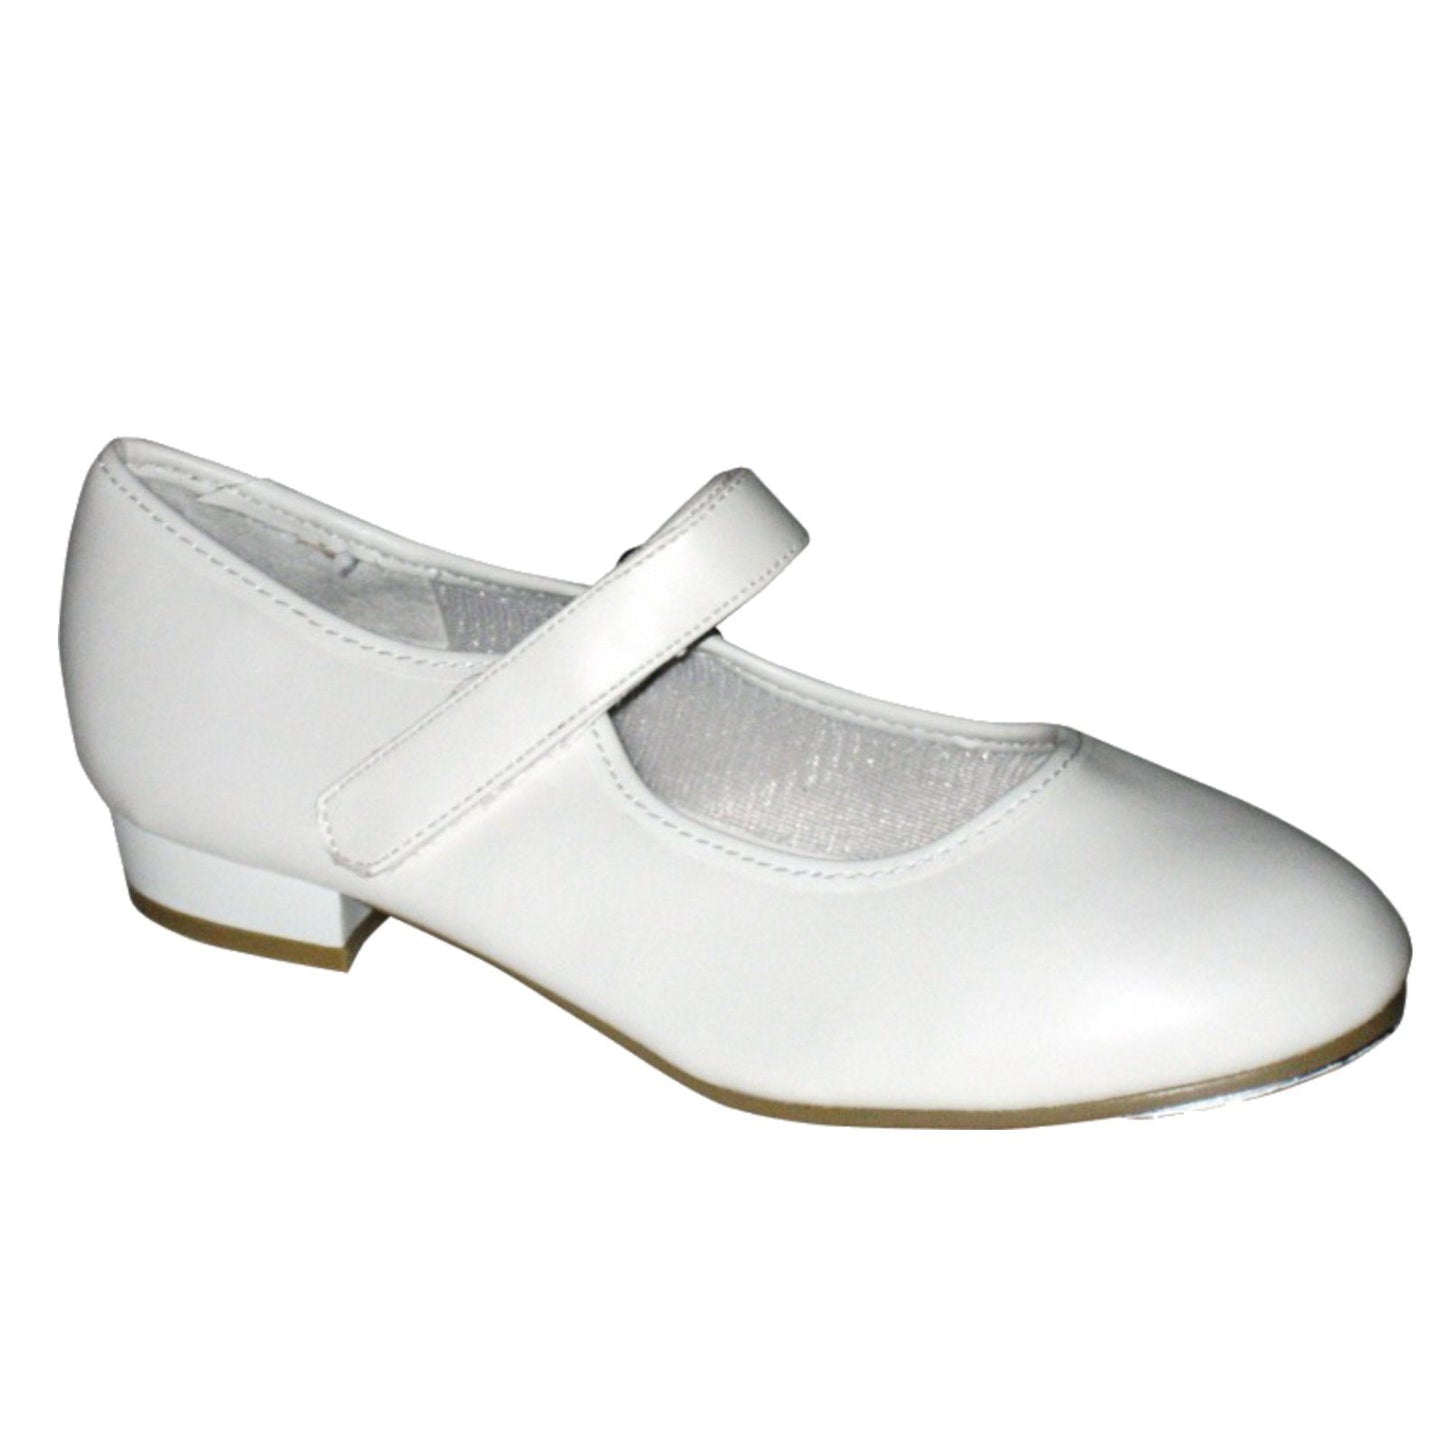 TAPPERS & POINTERS CHILDREN'S LOW HEEL VELCRO TAP SHOES Dance Shoes Tappers and Pointers White Junior 5 